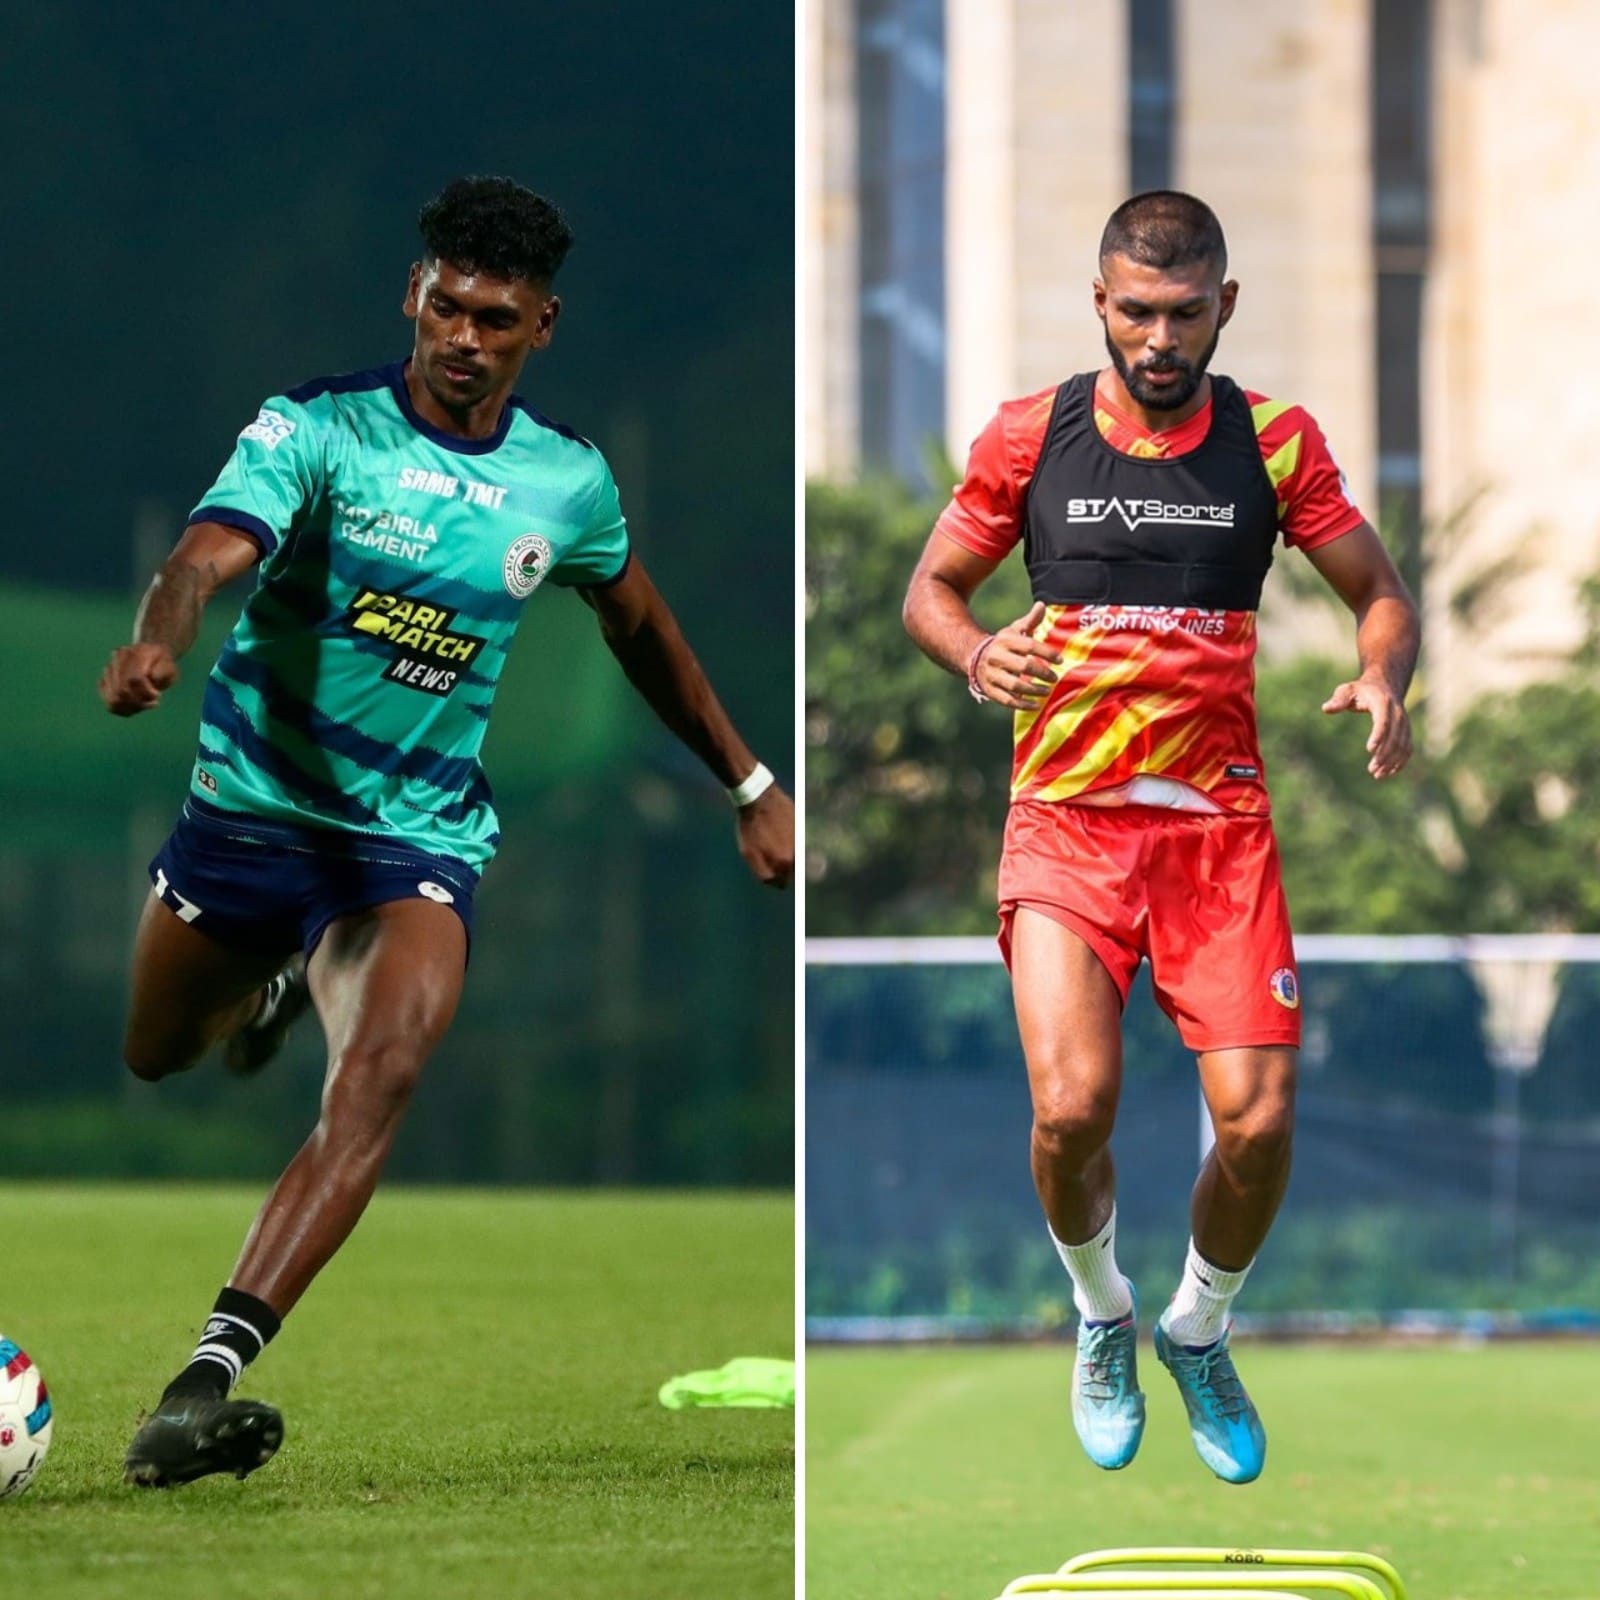 ISL 2022-23 ATK Mohun Bagan vs East Bengal in Kolkata Derby with More Than 3 Points on Offer